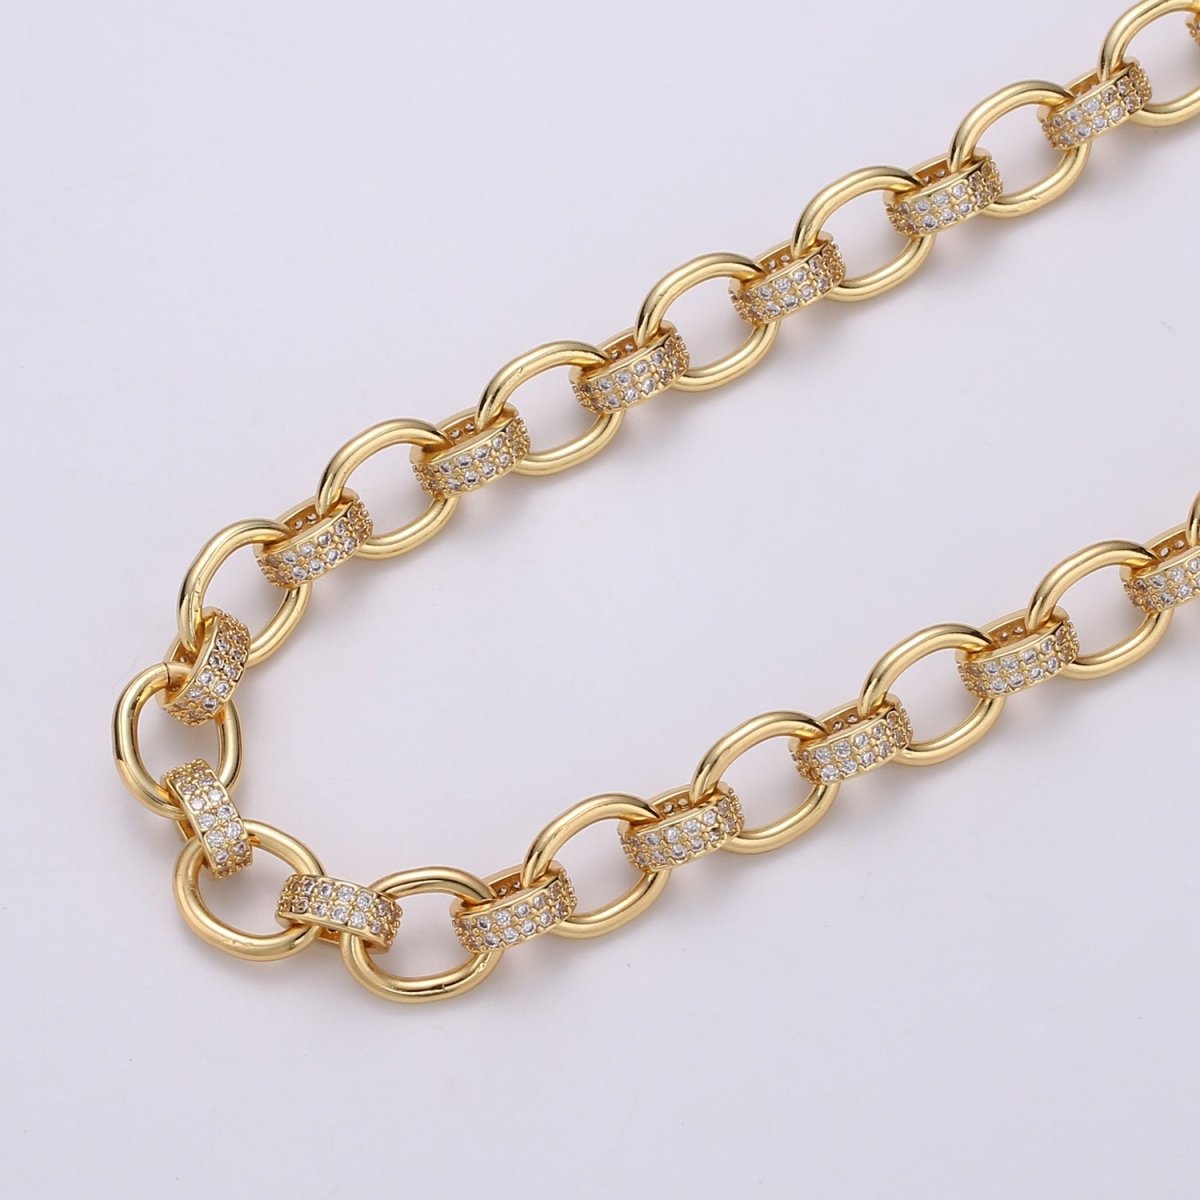 24K Gold Filled Fancy Texture ROLO Linked Chain by Yard, Wholesale Roll Chain | ROLL-373 (O-060) Clearance Pricing - DLUXCA